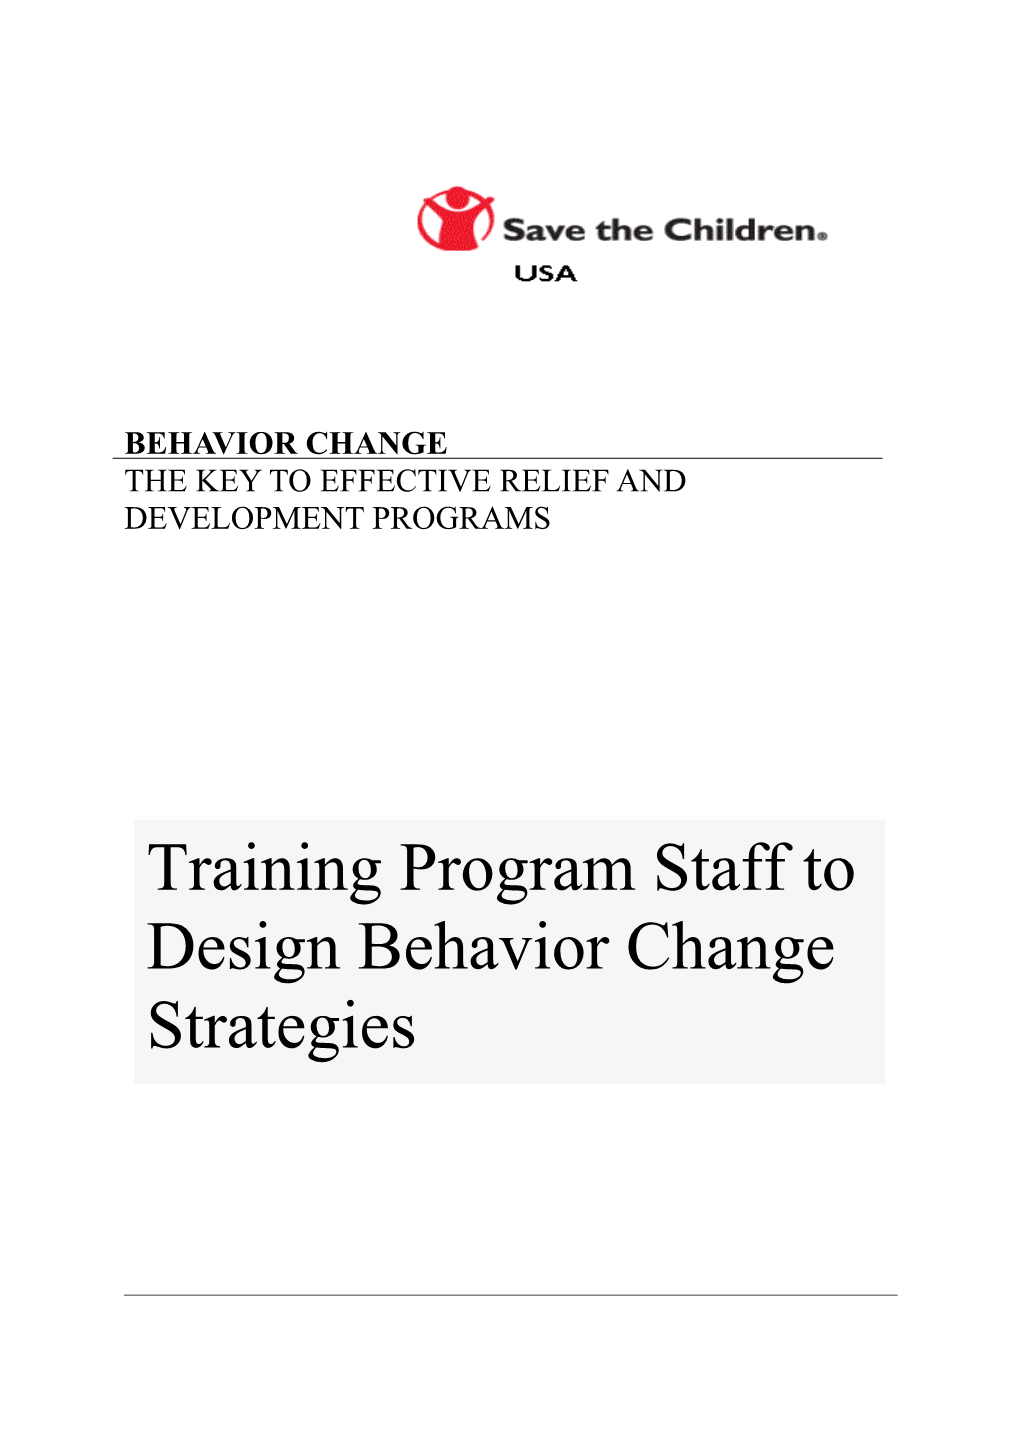 The Key to Effective Relief and Development Programs